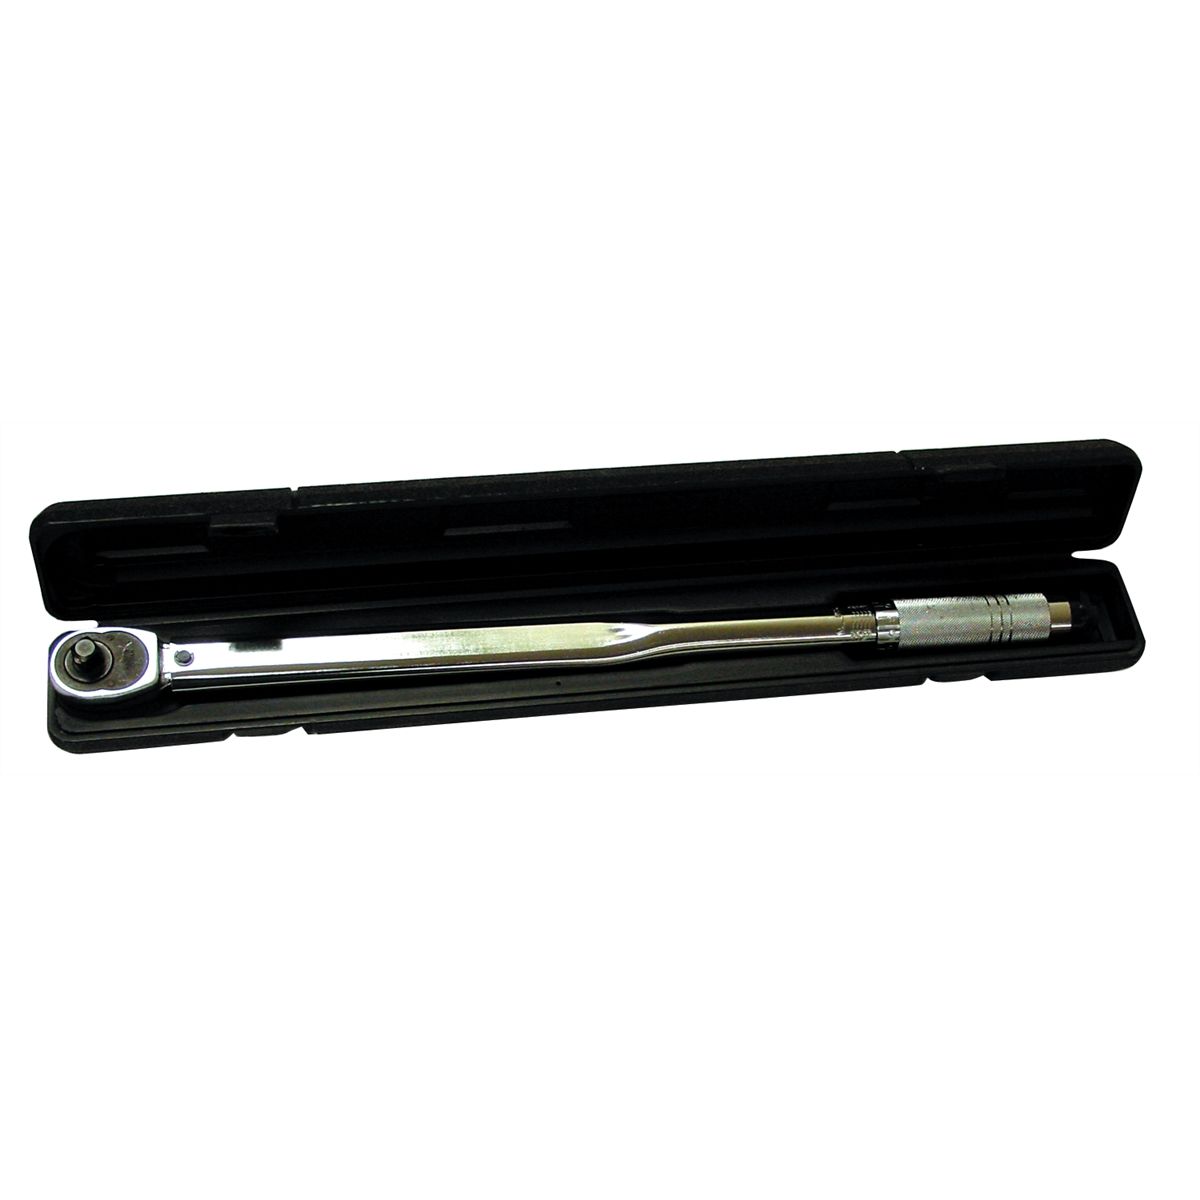 41 Tooth Ratchet 1//2/" Drive Click Type Torque Wrench 25 to 250 Ft lbs